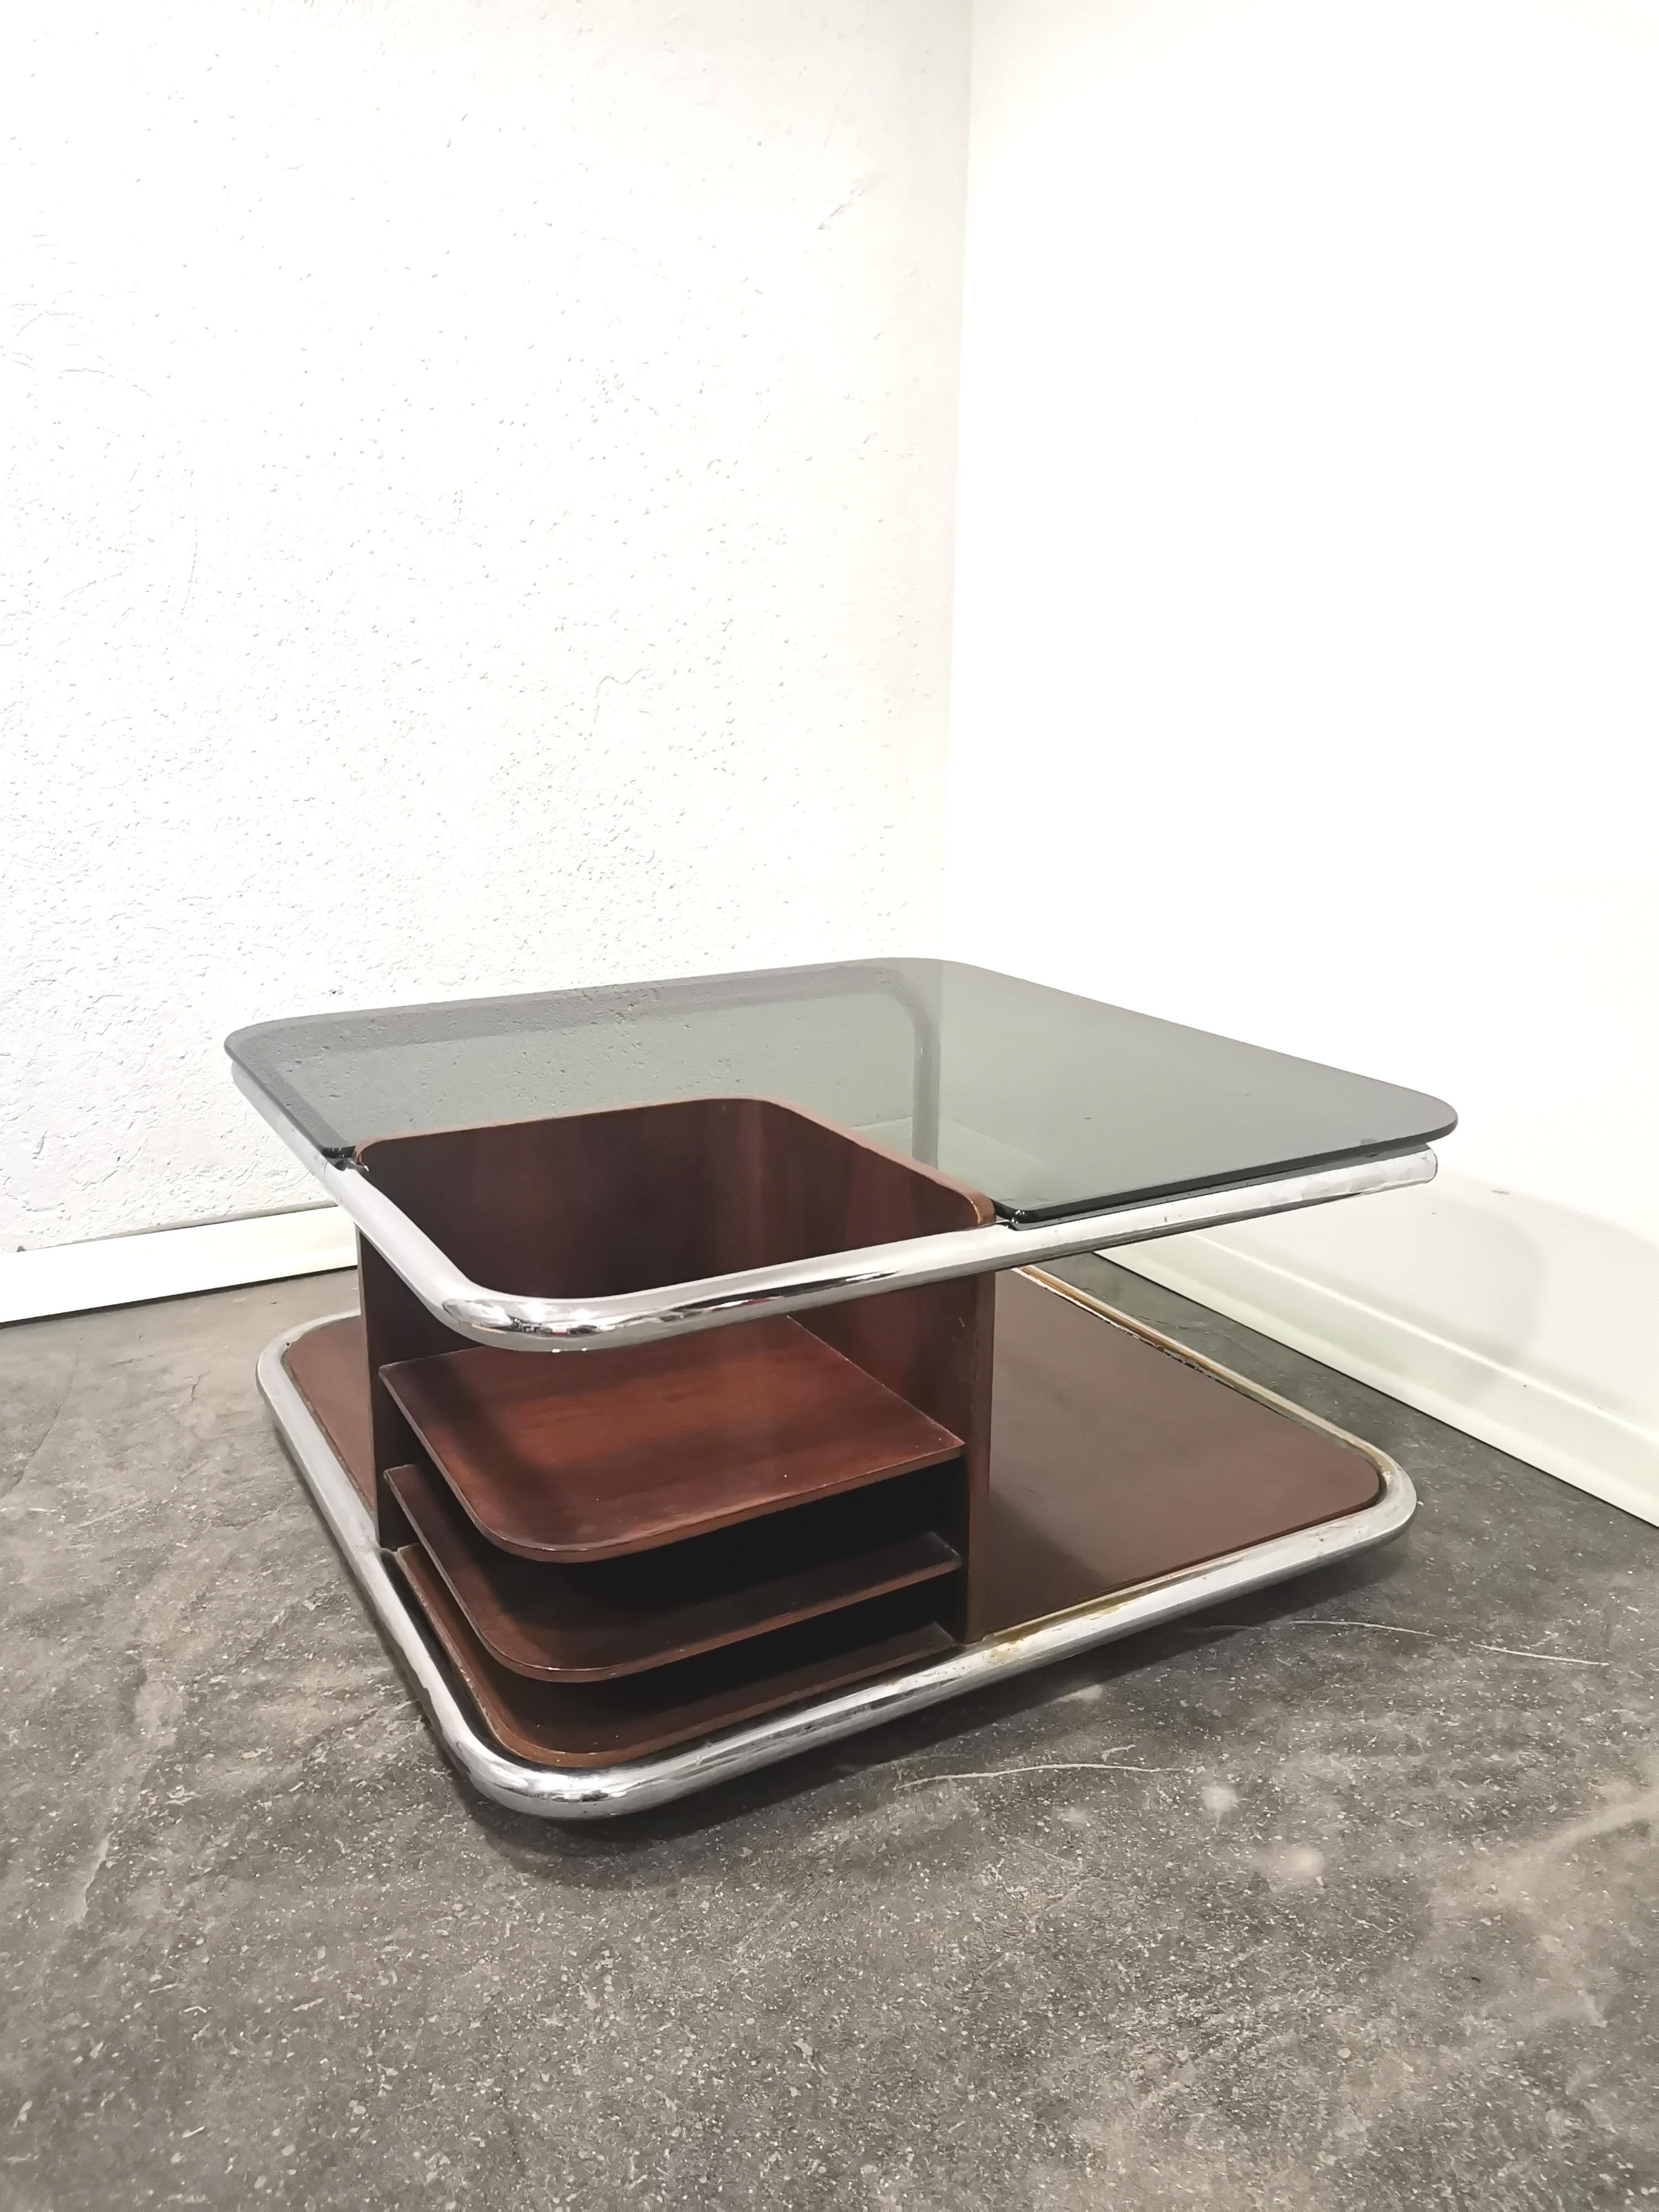 Nice square coffee table with 2 levels on wheels.

Italian  1970’s – this piece was made with original smoked glass, walnut wood and a metal tube without any welding.

Length 78 cm, Height 38 cm, Depth 78 cm